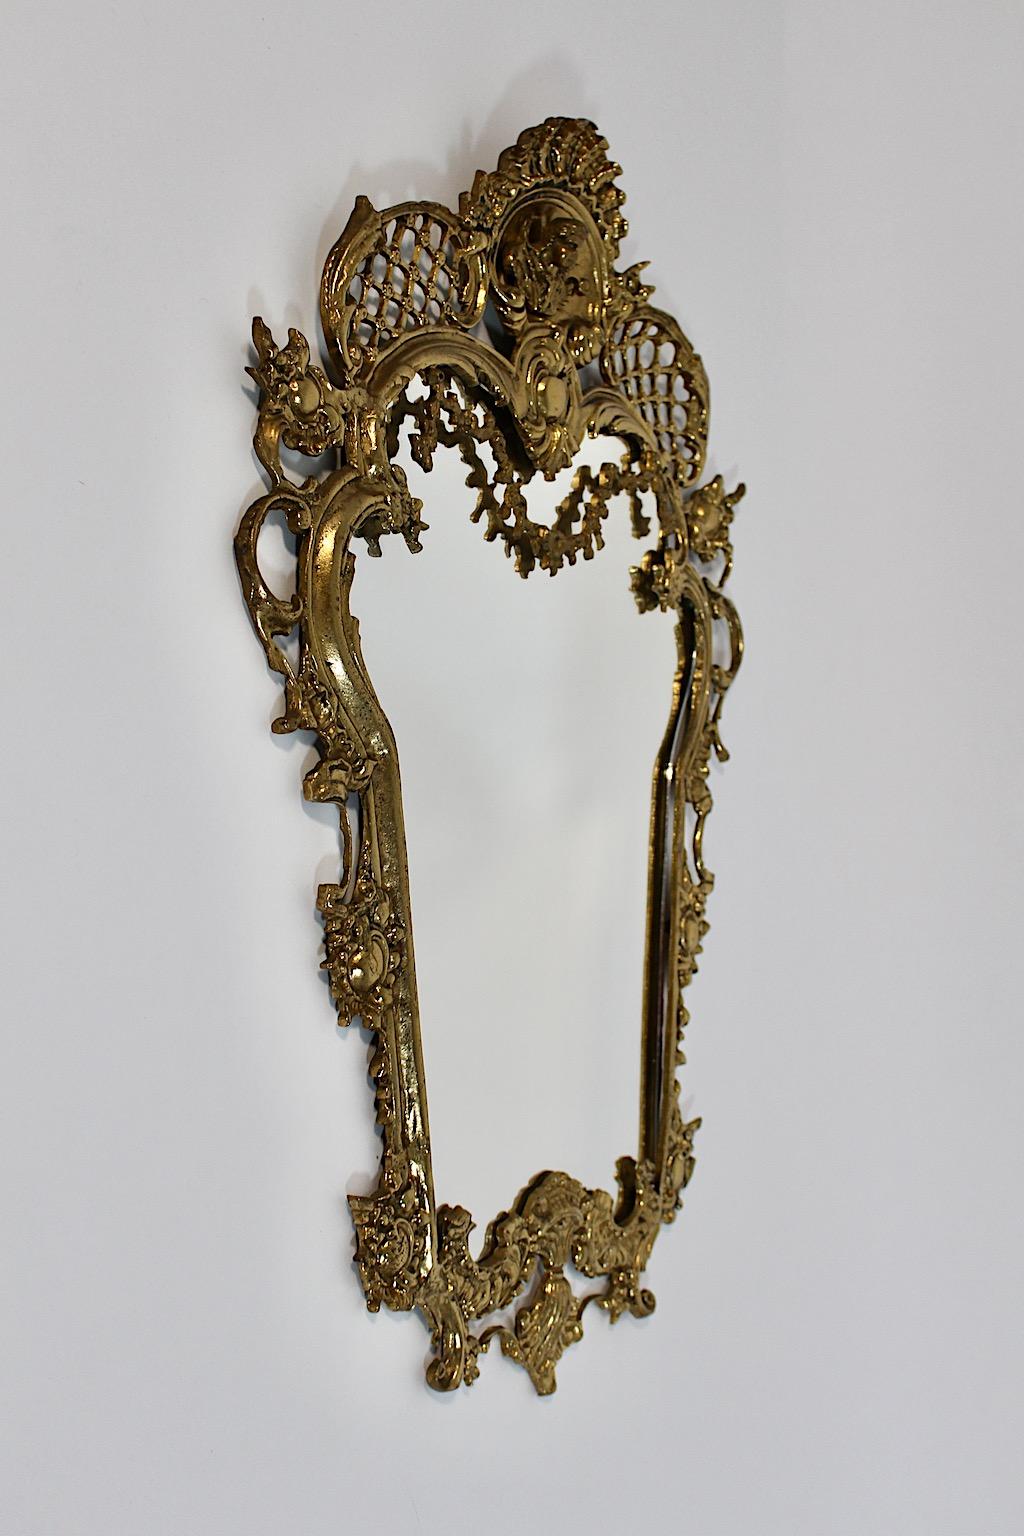 Italian Modern Vintage Brass Wall Mirror Style Baroque Revival Italy 1970s For Sale